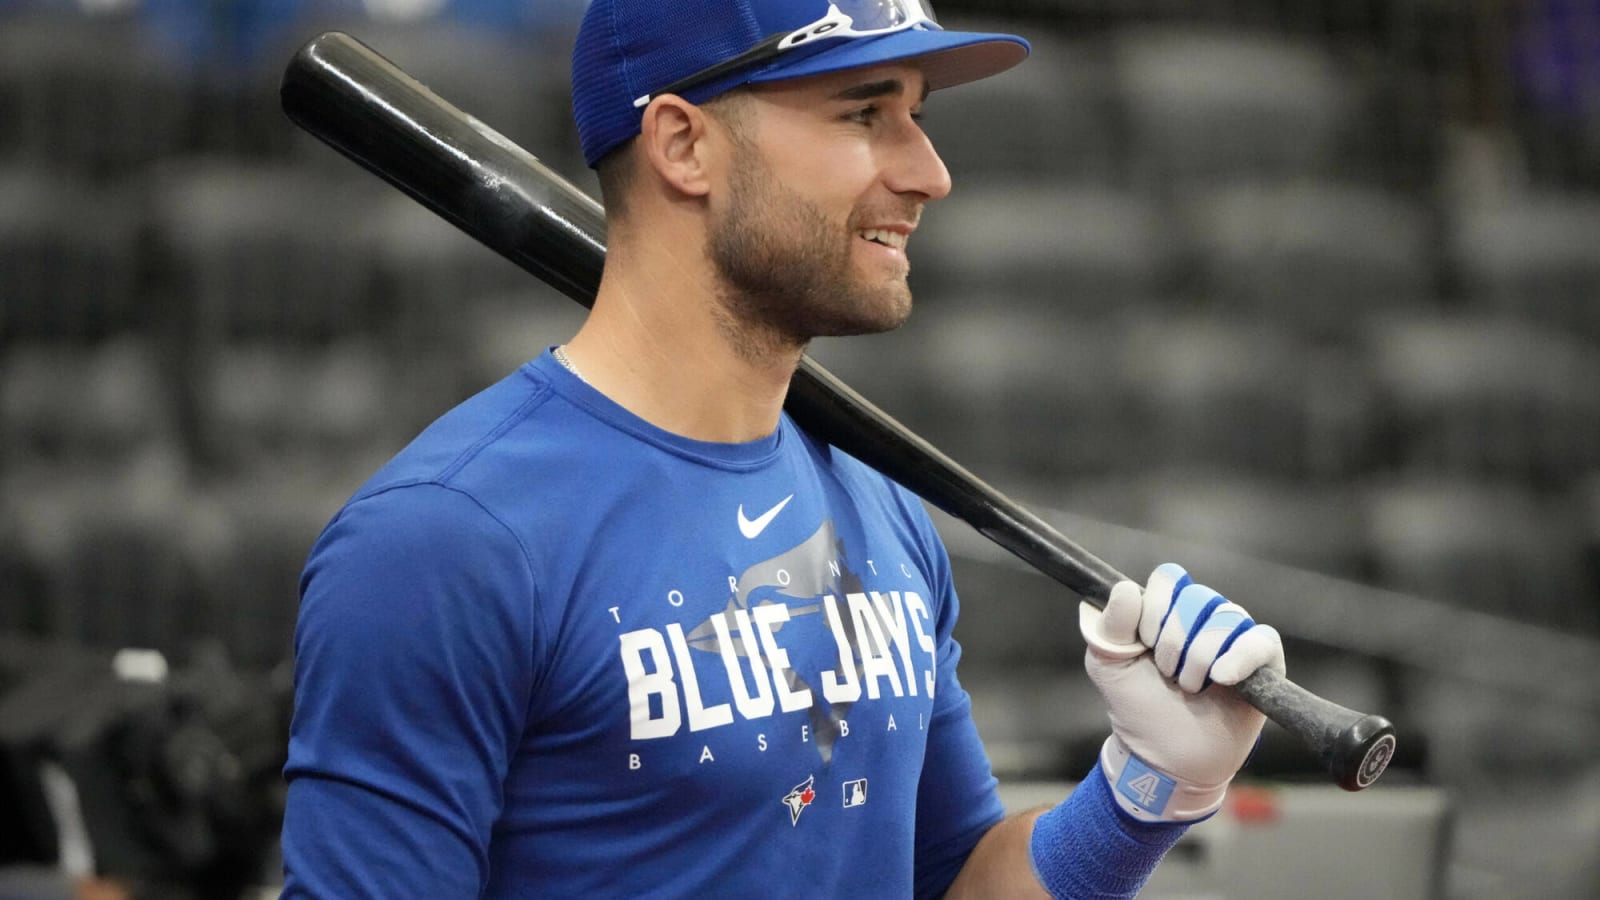 The New York Yankees are reportedly interested in Gold Glove winner Kevin Kiermaier